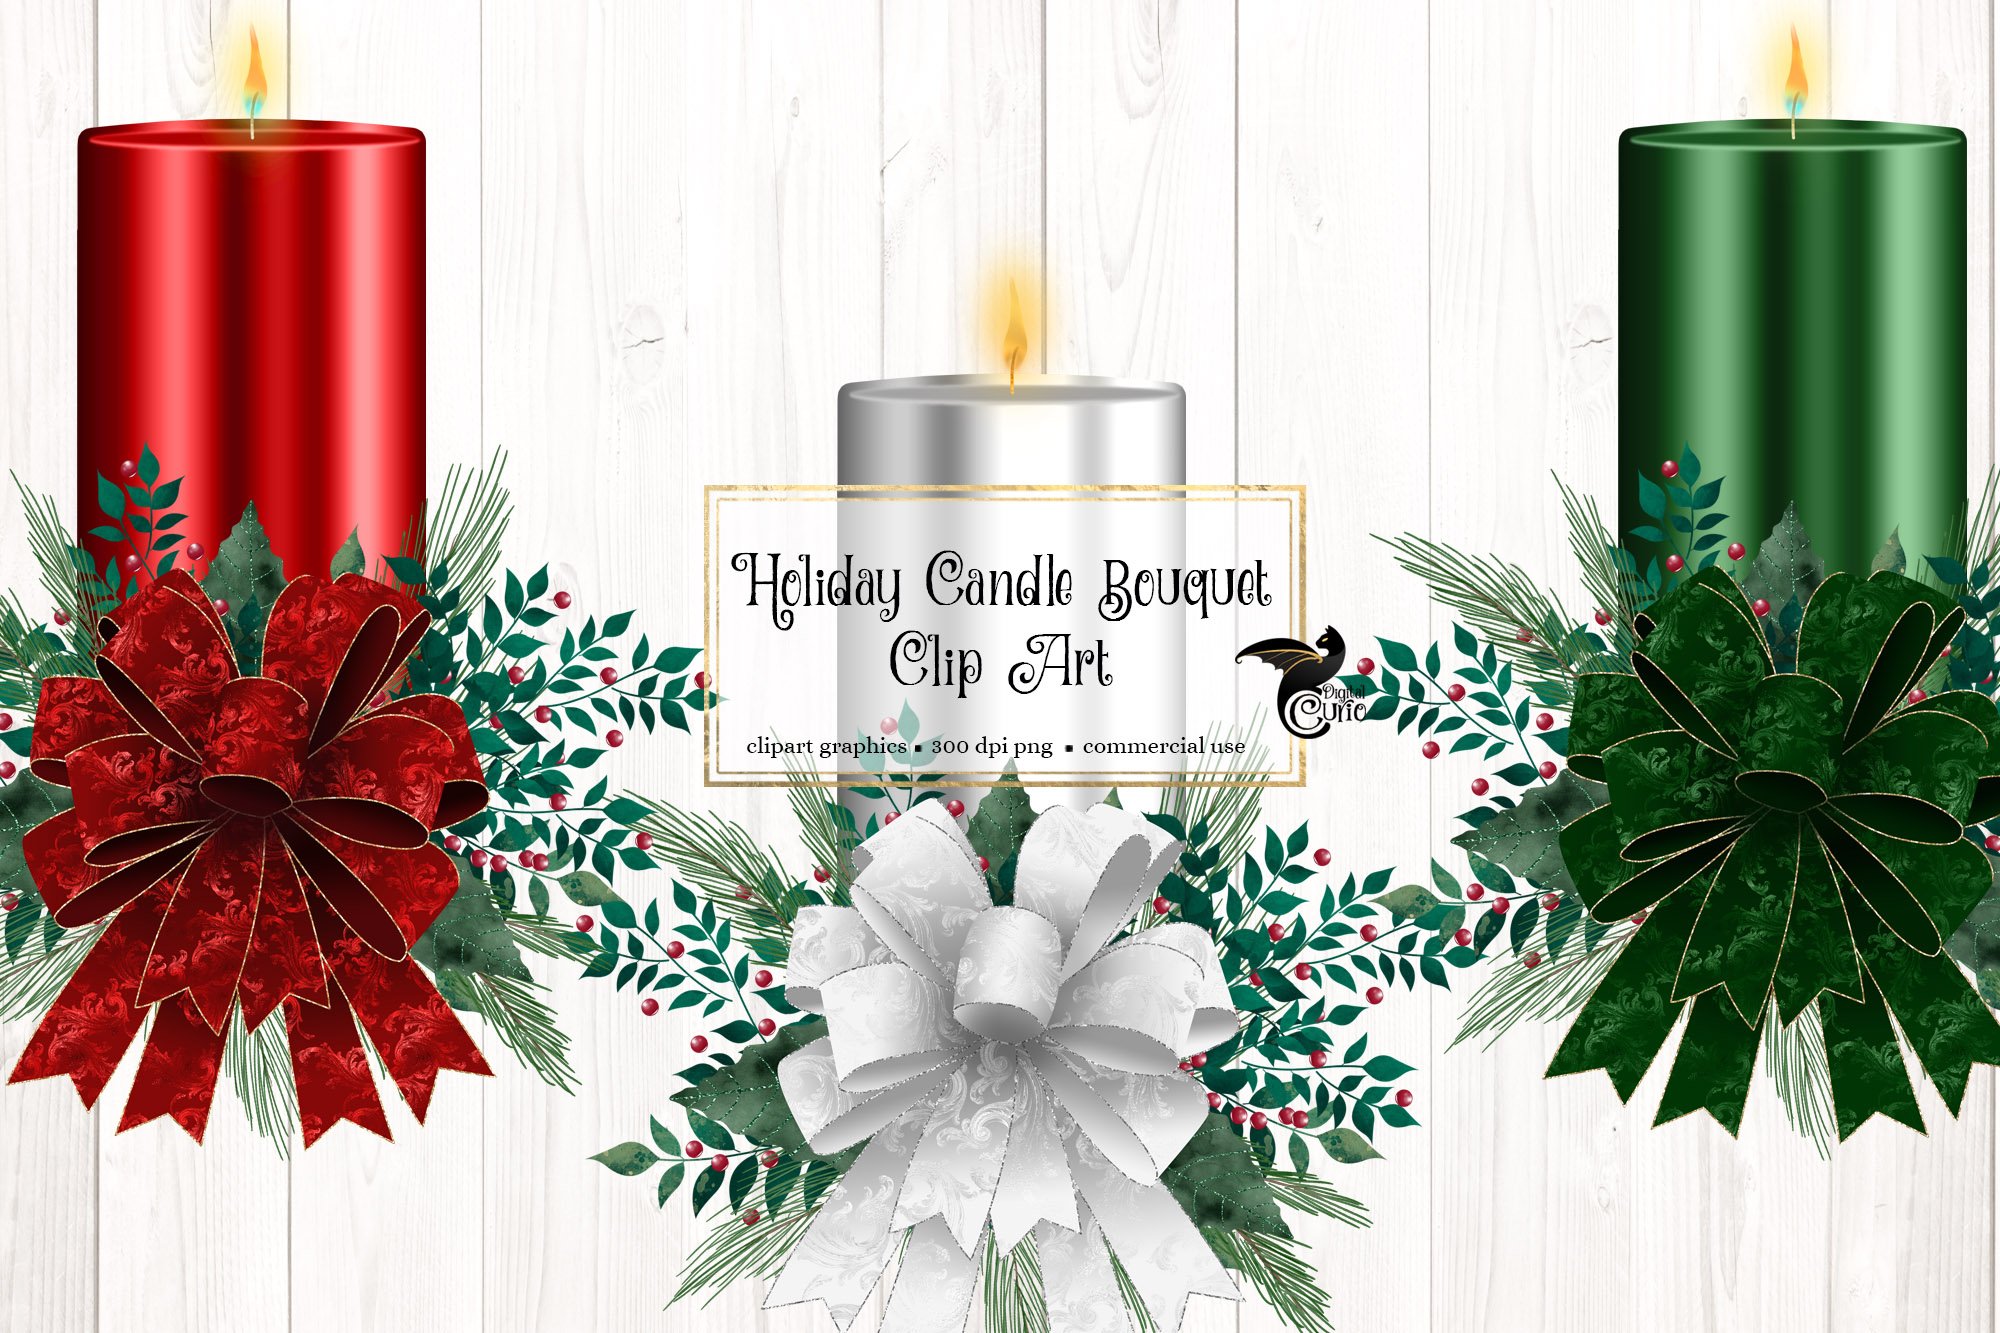 Holiday Candle Bouquets cover image.